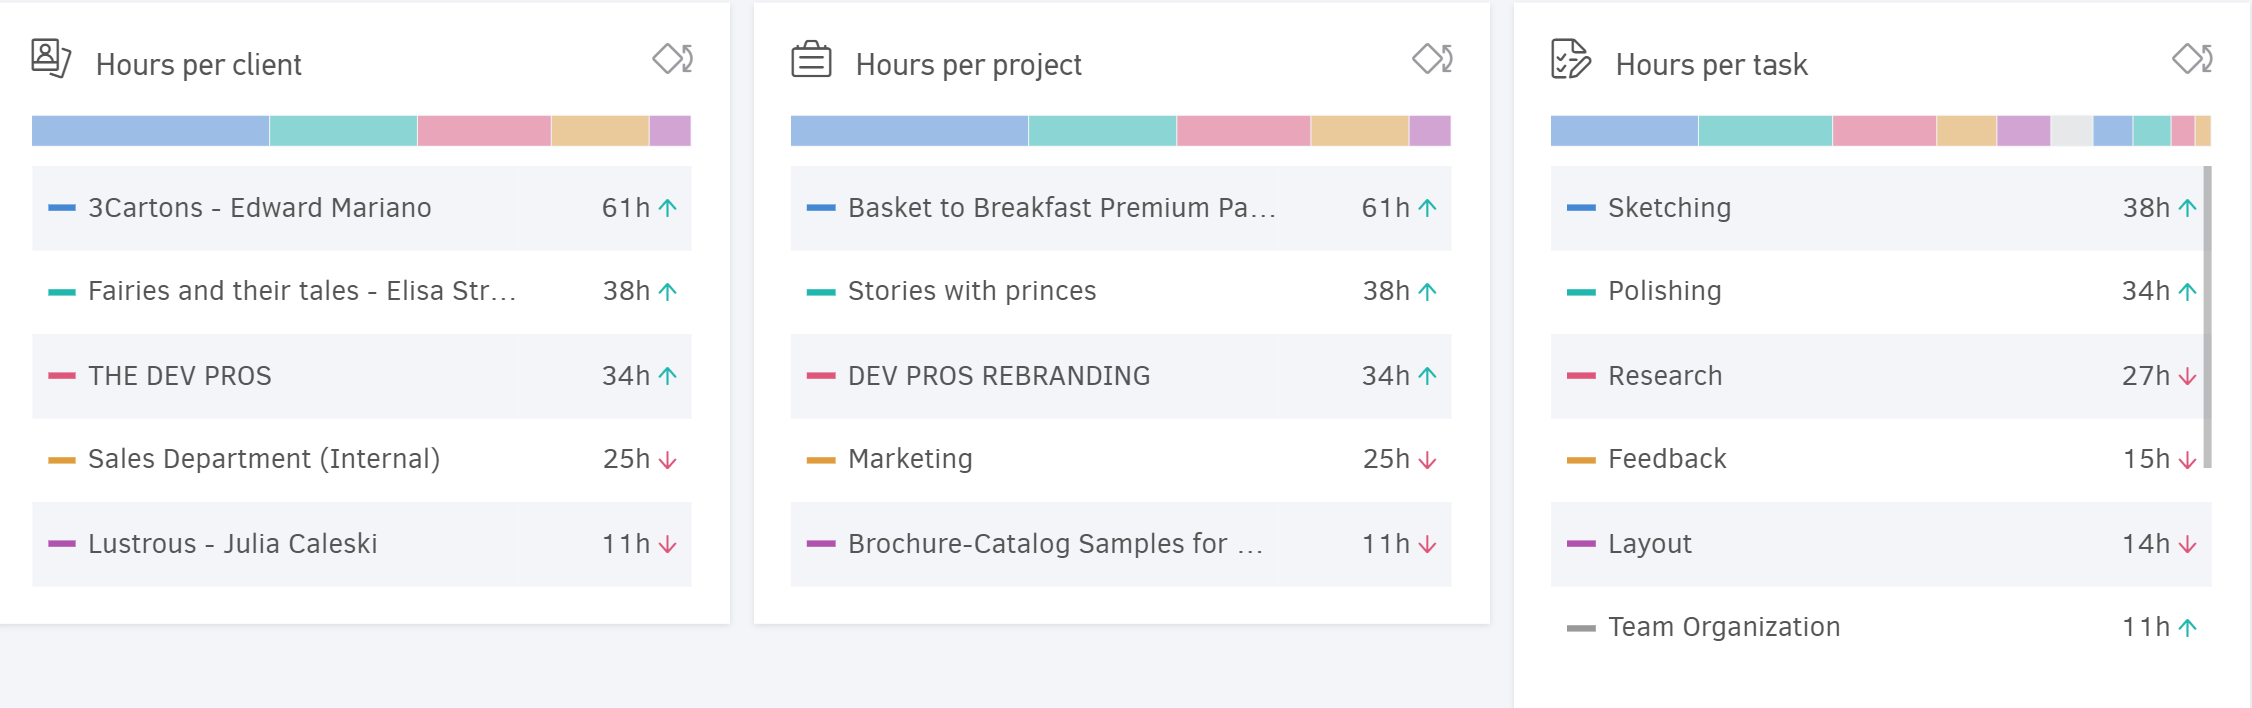 Hours per client, project & task